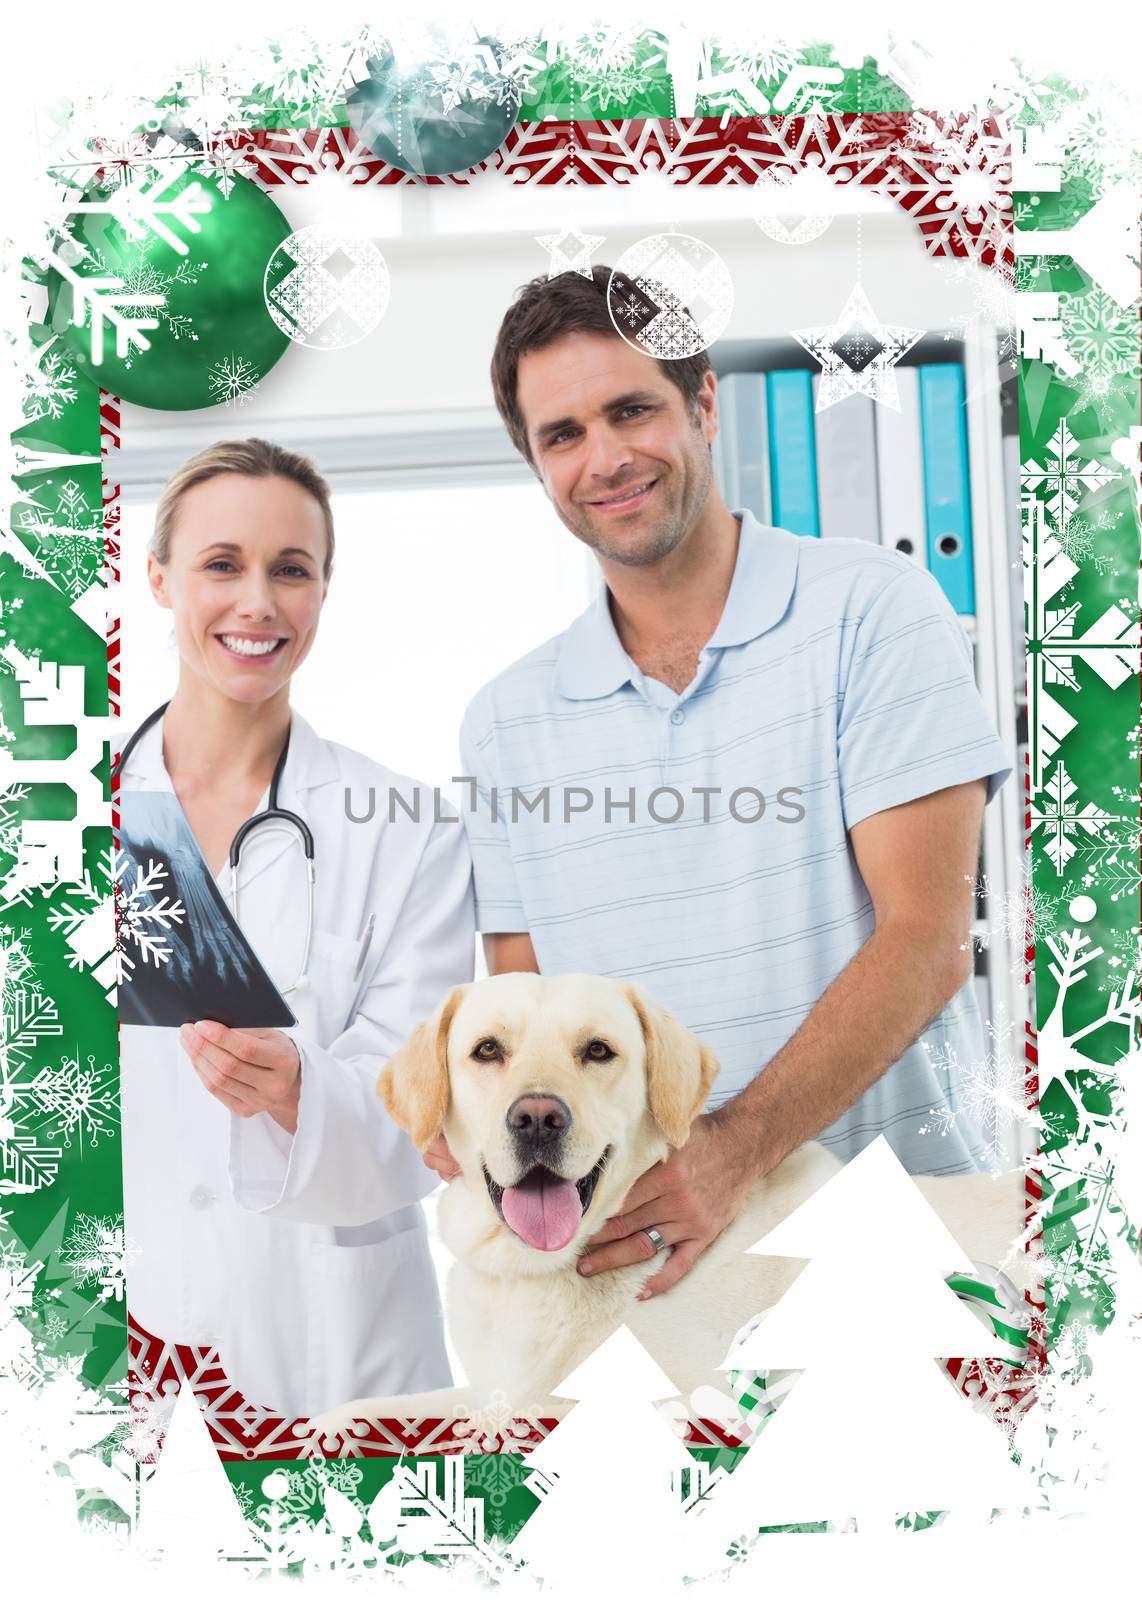 Composite image of pet owner and vet with xray of dog by Wavebreakmedia